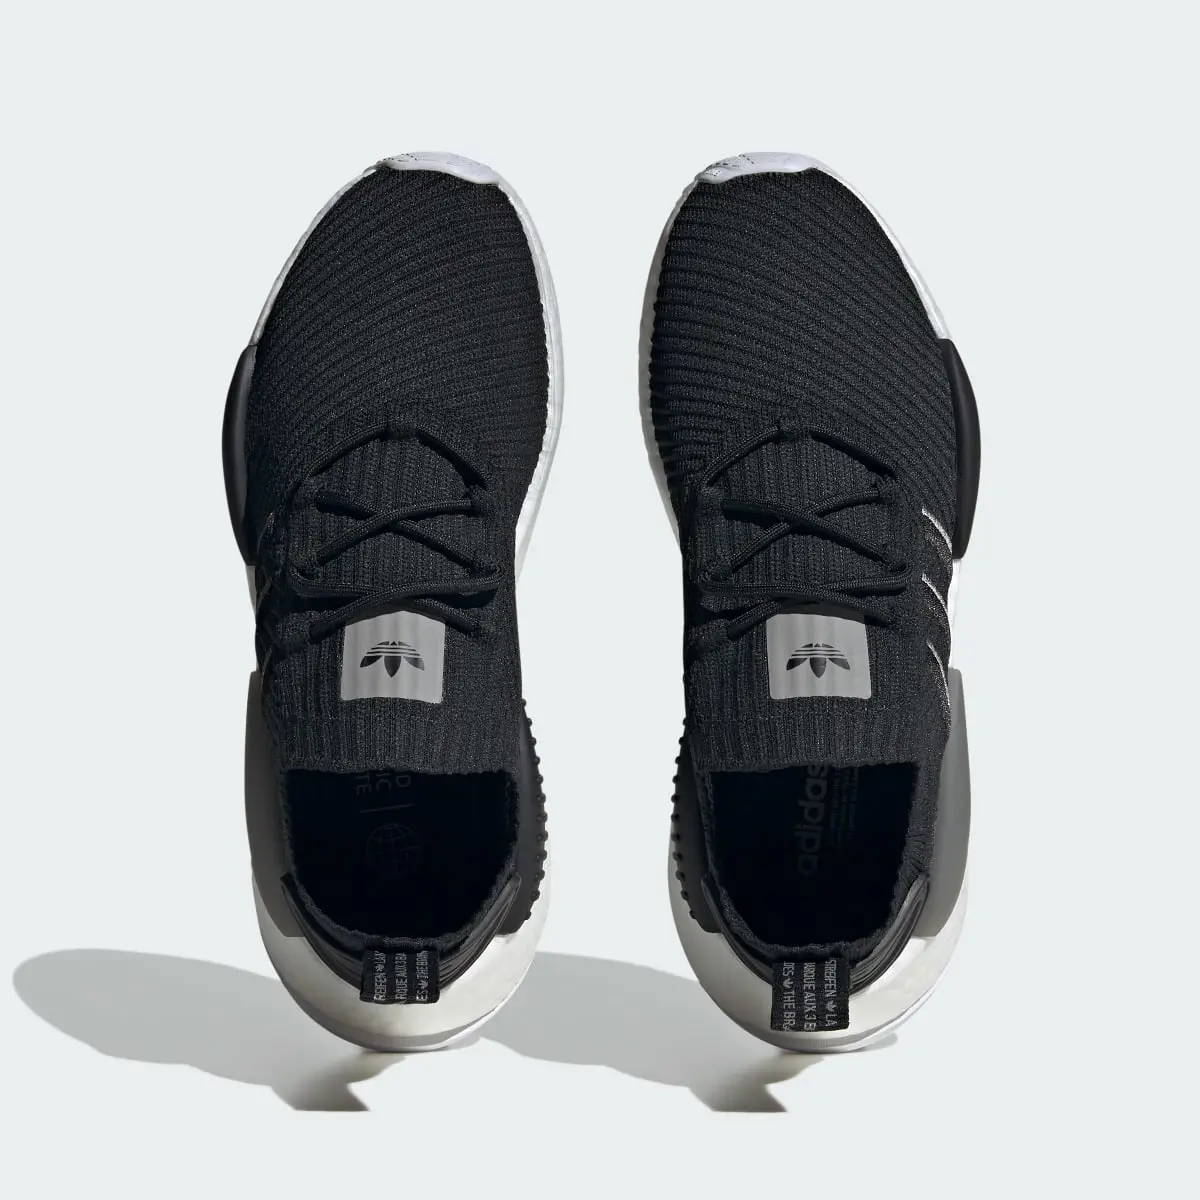 Adidas NMD_W1 Shoes. 3